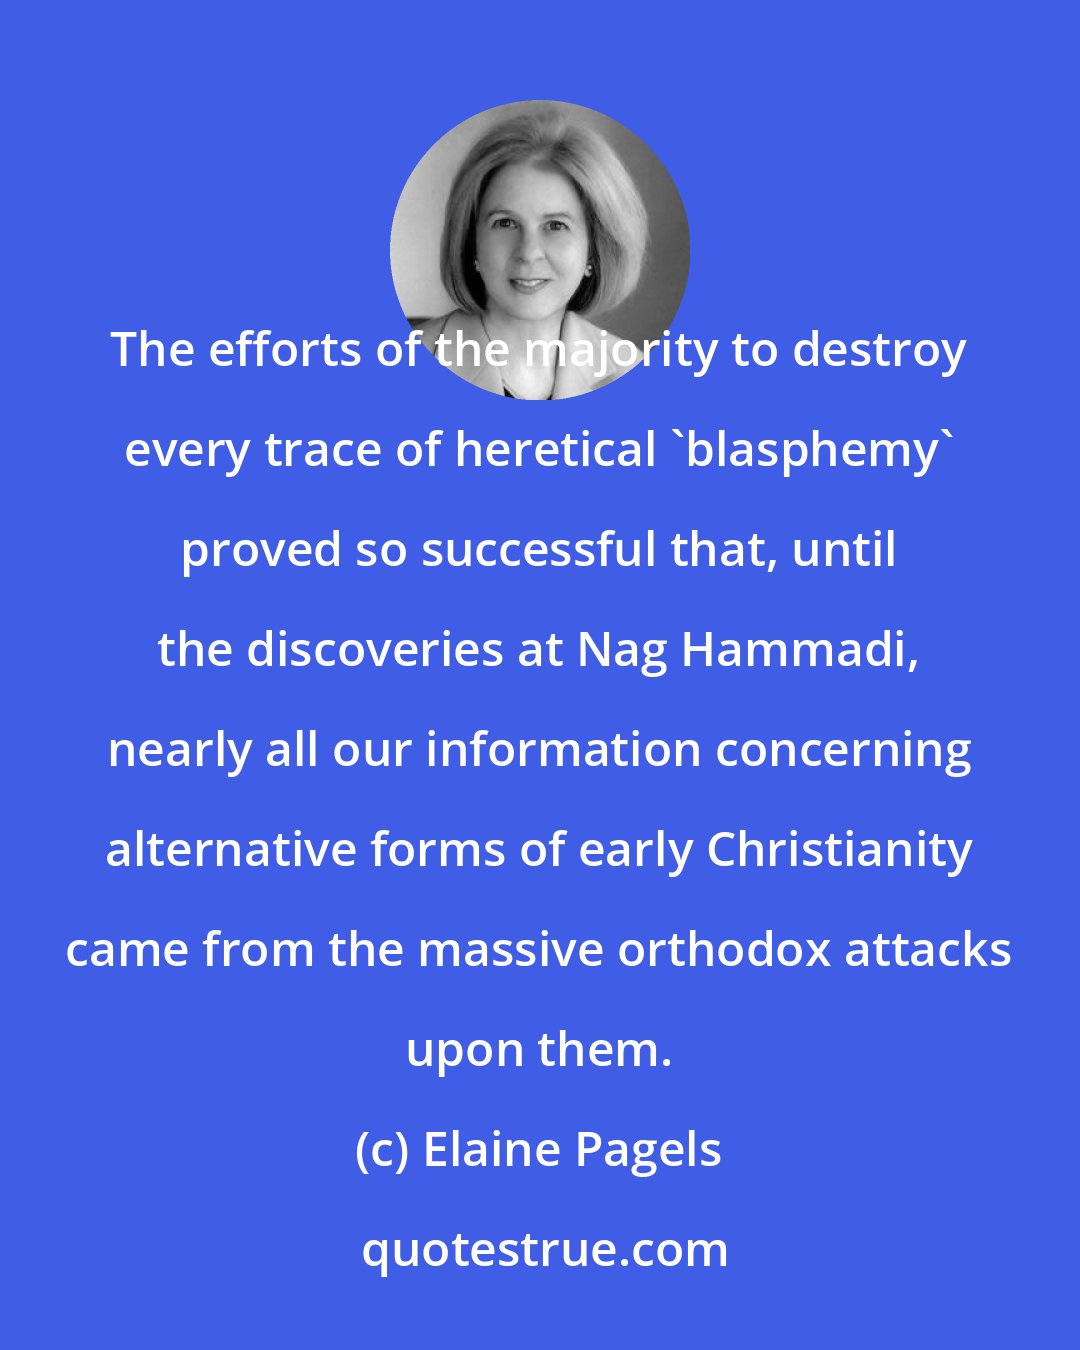 Elaine Pagels: The efforts of the majority to destroy every trace of heretical 'blasphemy' proved so successful that, until the discoveries at Nag Hammadi, nearly all our information concerning alternative forms of early Christianity came from the massive orthodox attacks upon them.